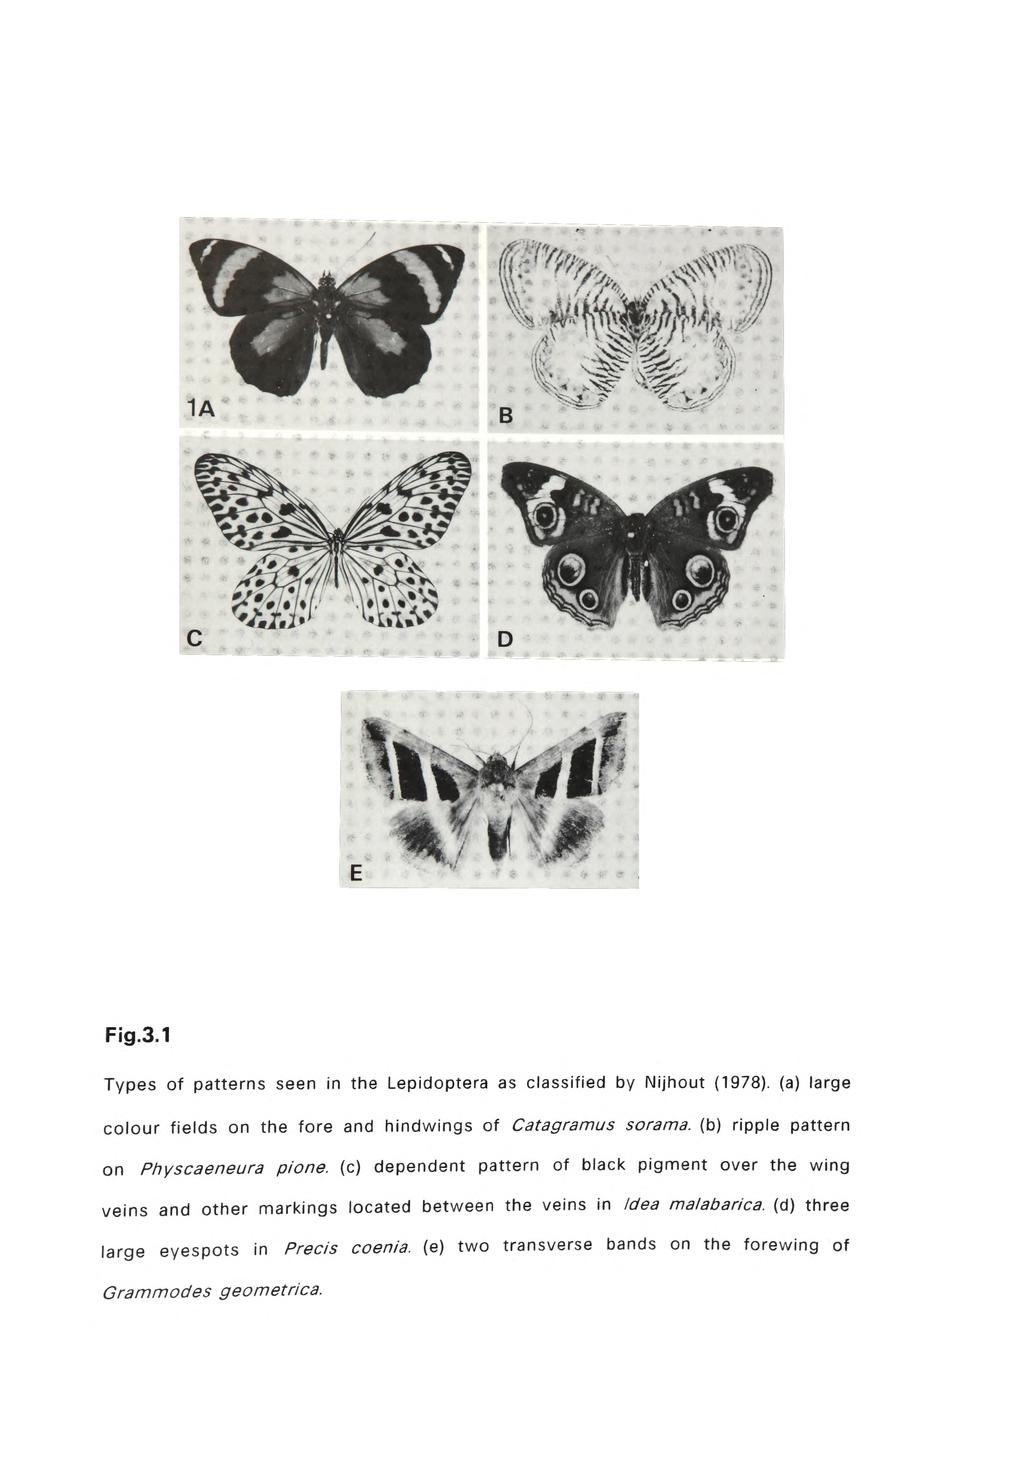 Fig.3.1 Types of patterns seen in the Lepidoptera as classified by IMijhout (1978). (a) large colour fields on the fore and hindwings of Catagramus sorama. (b) ripple pattern on Physcaeneura pione.